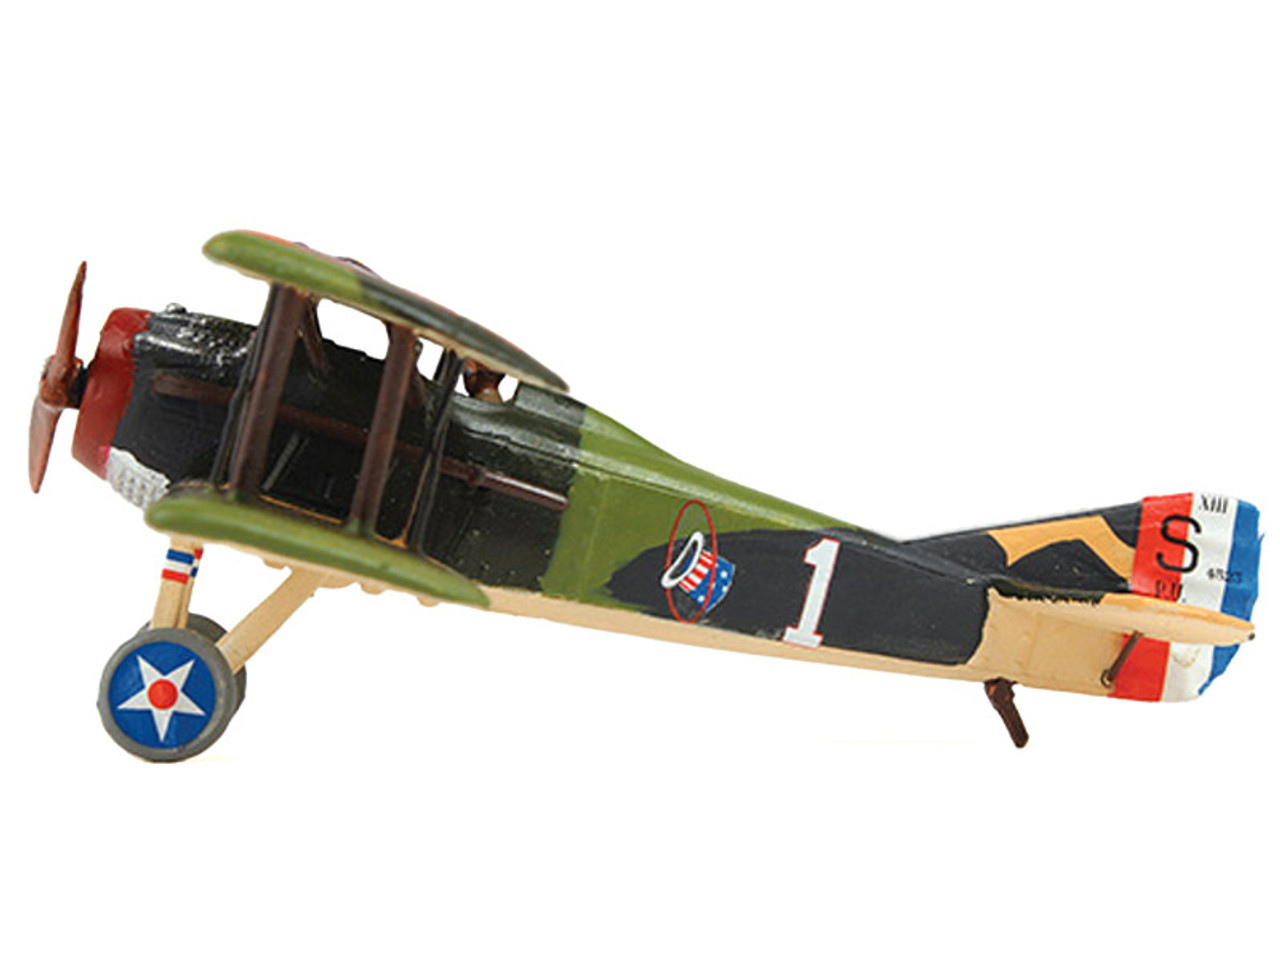 SPAD XIII Aircraft "4523 94th Aero Squadron E.V. Rickenbacker" United States Air Service 1/72 Model Airplane by Wings of the Great War